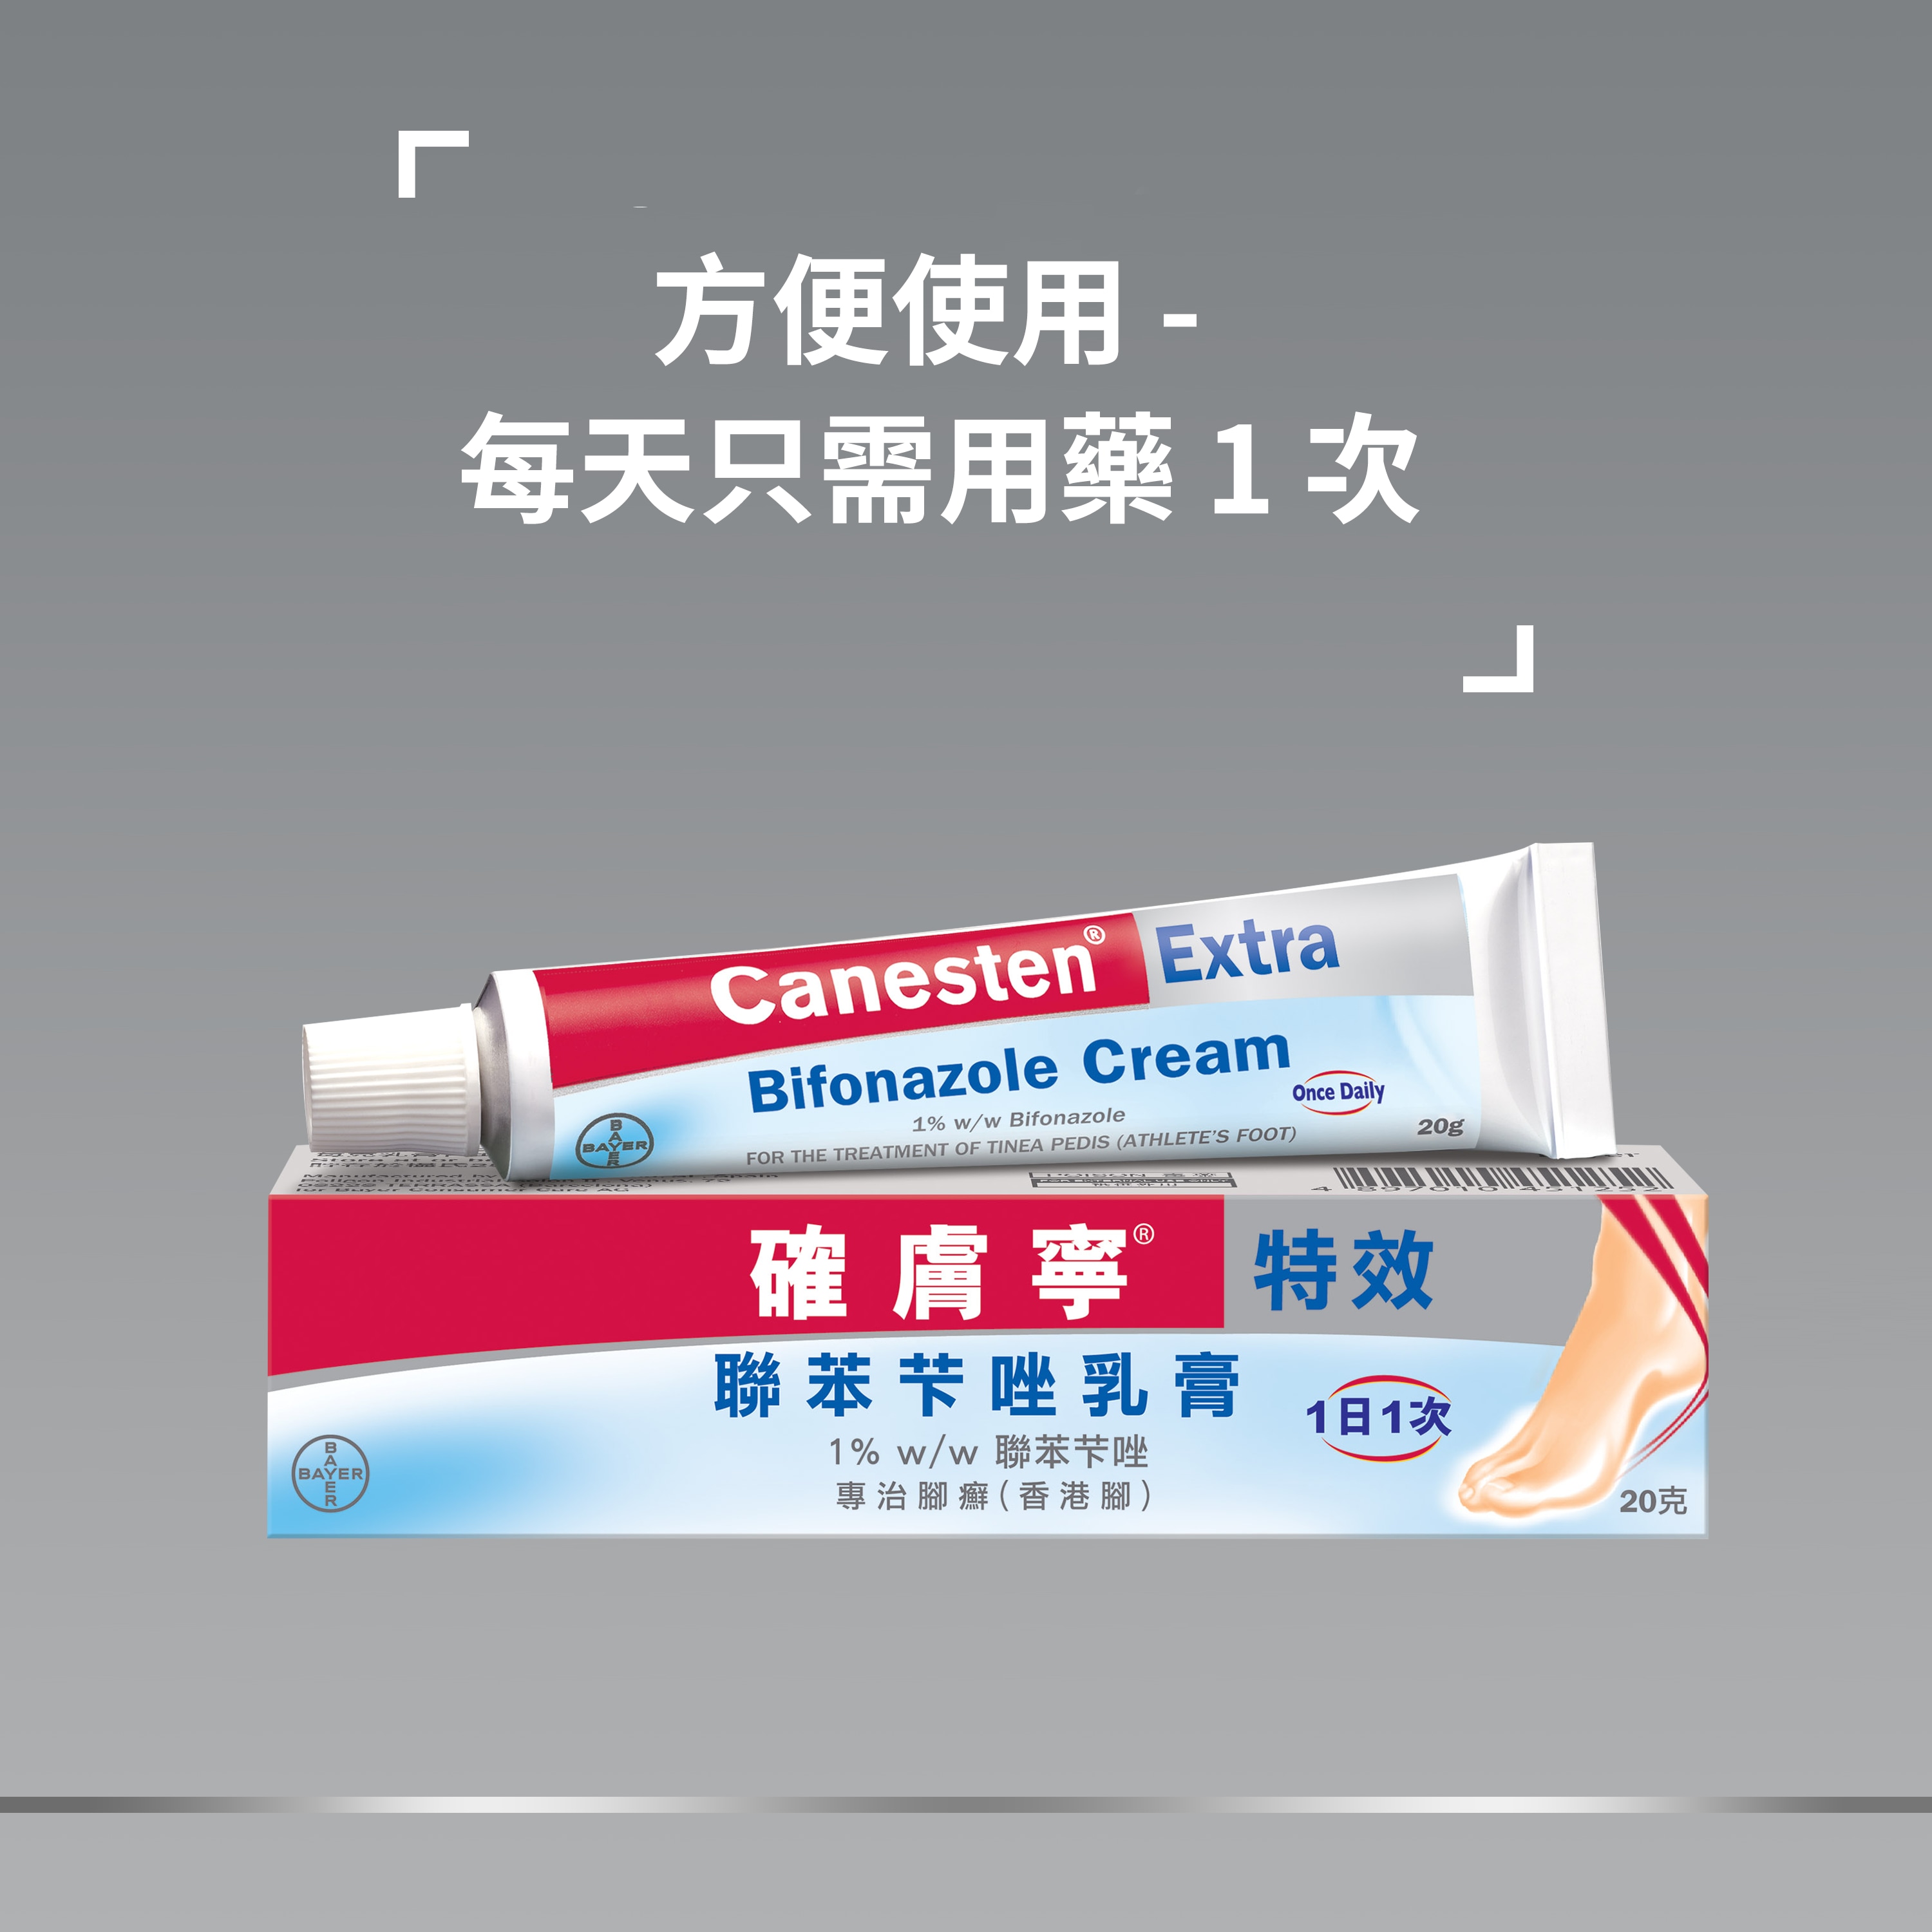 Canesten Extra 1% Bifonazole Multi-Action Cream 20g for athlete’s foot and skin fungus treatment, with caption on top: Convenient – only 1 application per day   